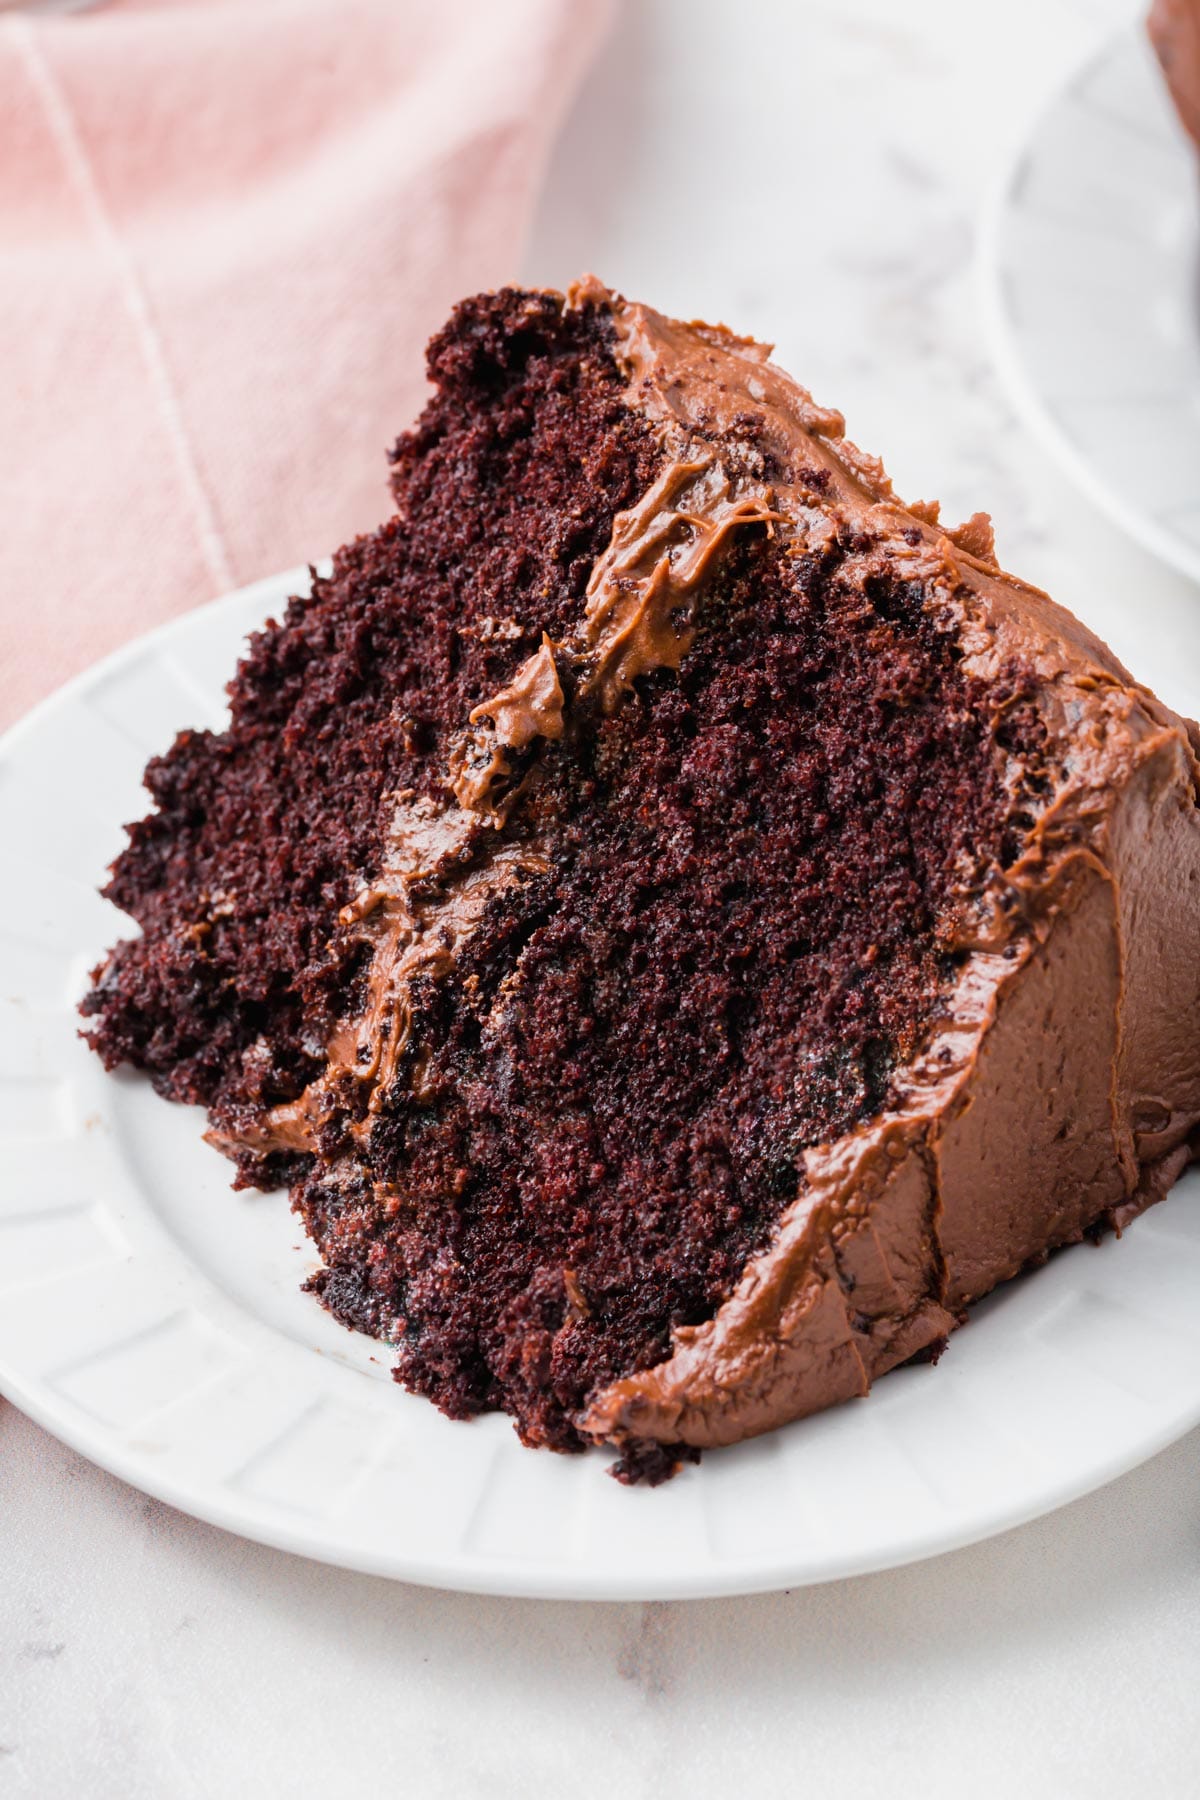 A slice of a gluten-free chocolate cake with chocolate frosting on a plate.